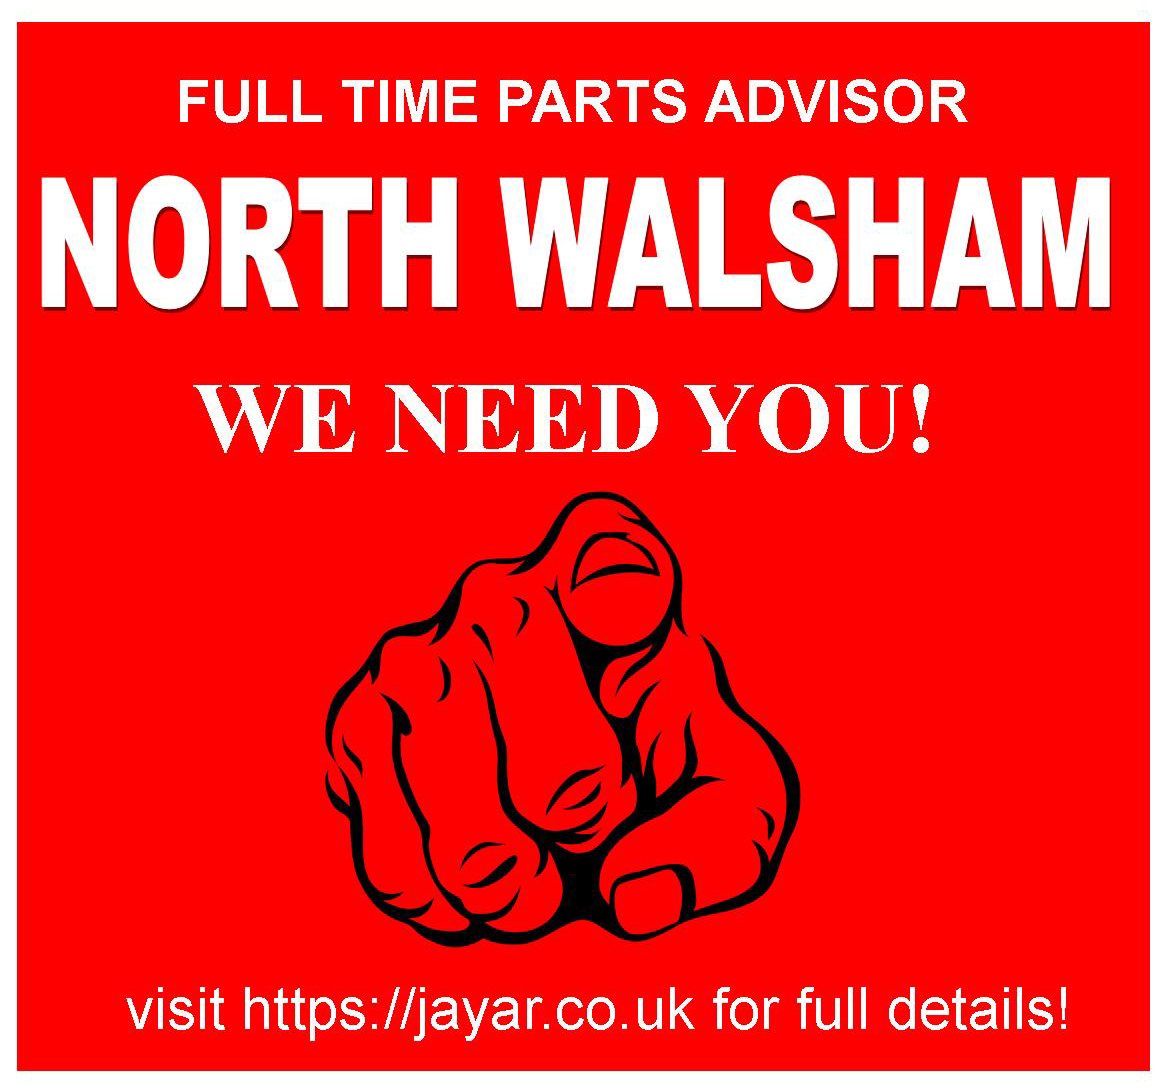 If car parts are your passion, we have an amazing opportunity for you!
We are looking for a full time Part's Advisor to join our team at our busy #NorthWalsham Branch.
For a full  job description & to apply, please visit
jayar.co.uk/jobs/full-time… Good Luck 👍 #norfolkjobs